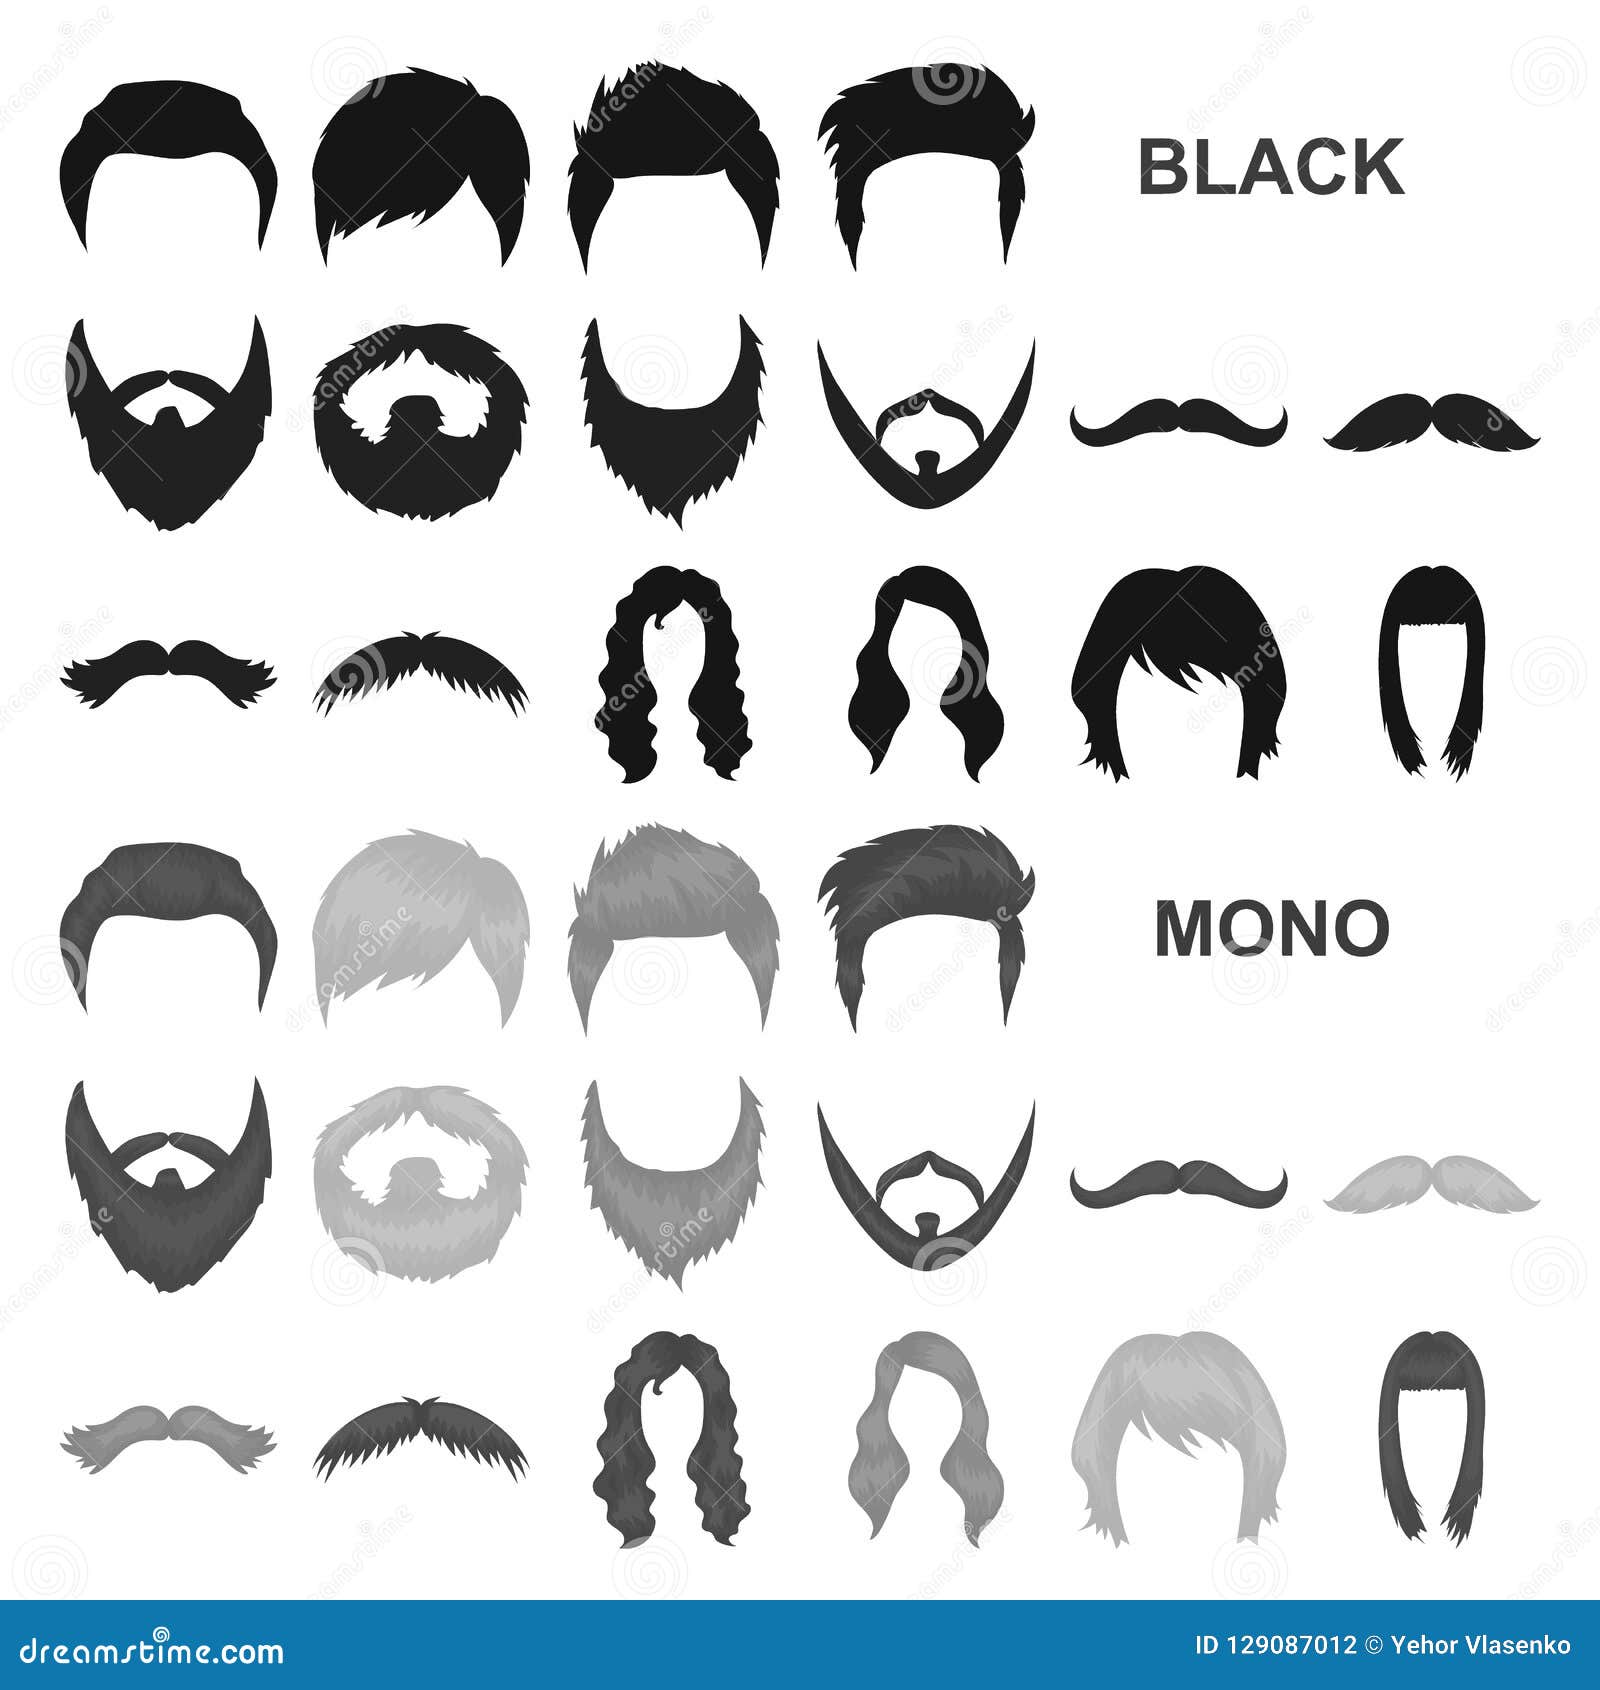 Mustache and Beard, Hairstyles Black Icons in Set Collection for Design.  Stylish Haircut Vector Symbol Stock Web Stock Vector - Illustration of  icon, hair: 129087012